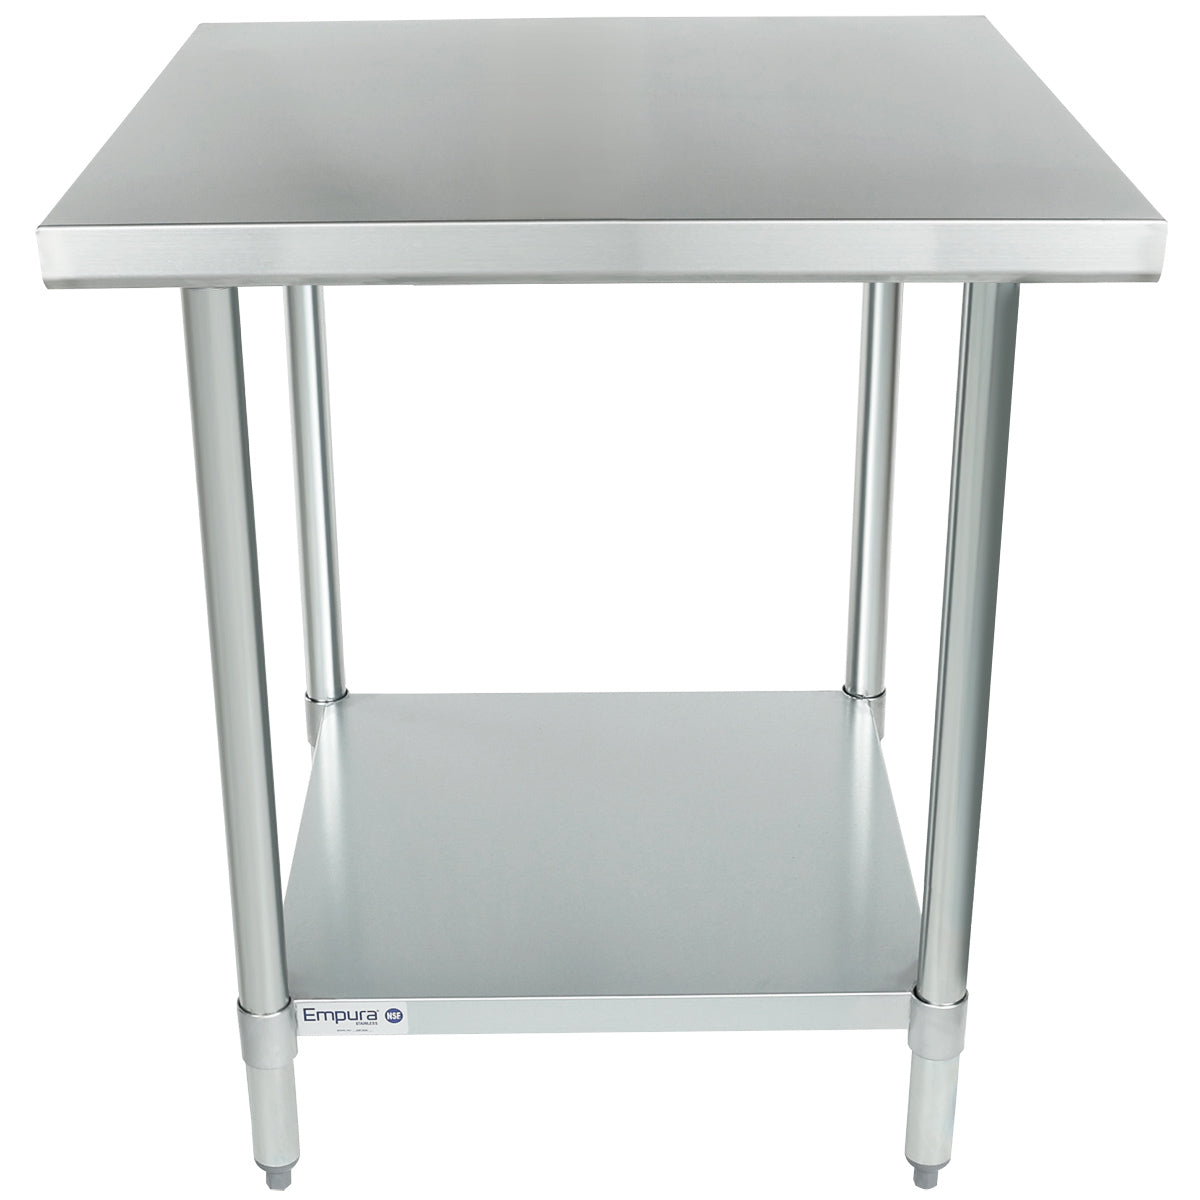 Empura 30" x 30" 18-Gauge 430 Stainless Steel Commercial Work Table with Flat Top Galvanized Legs and Undershelf